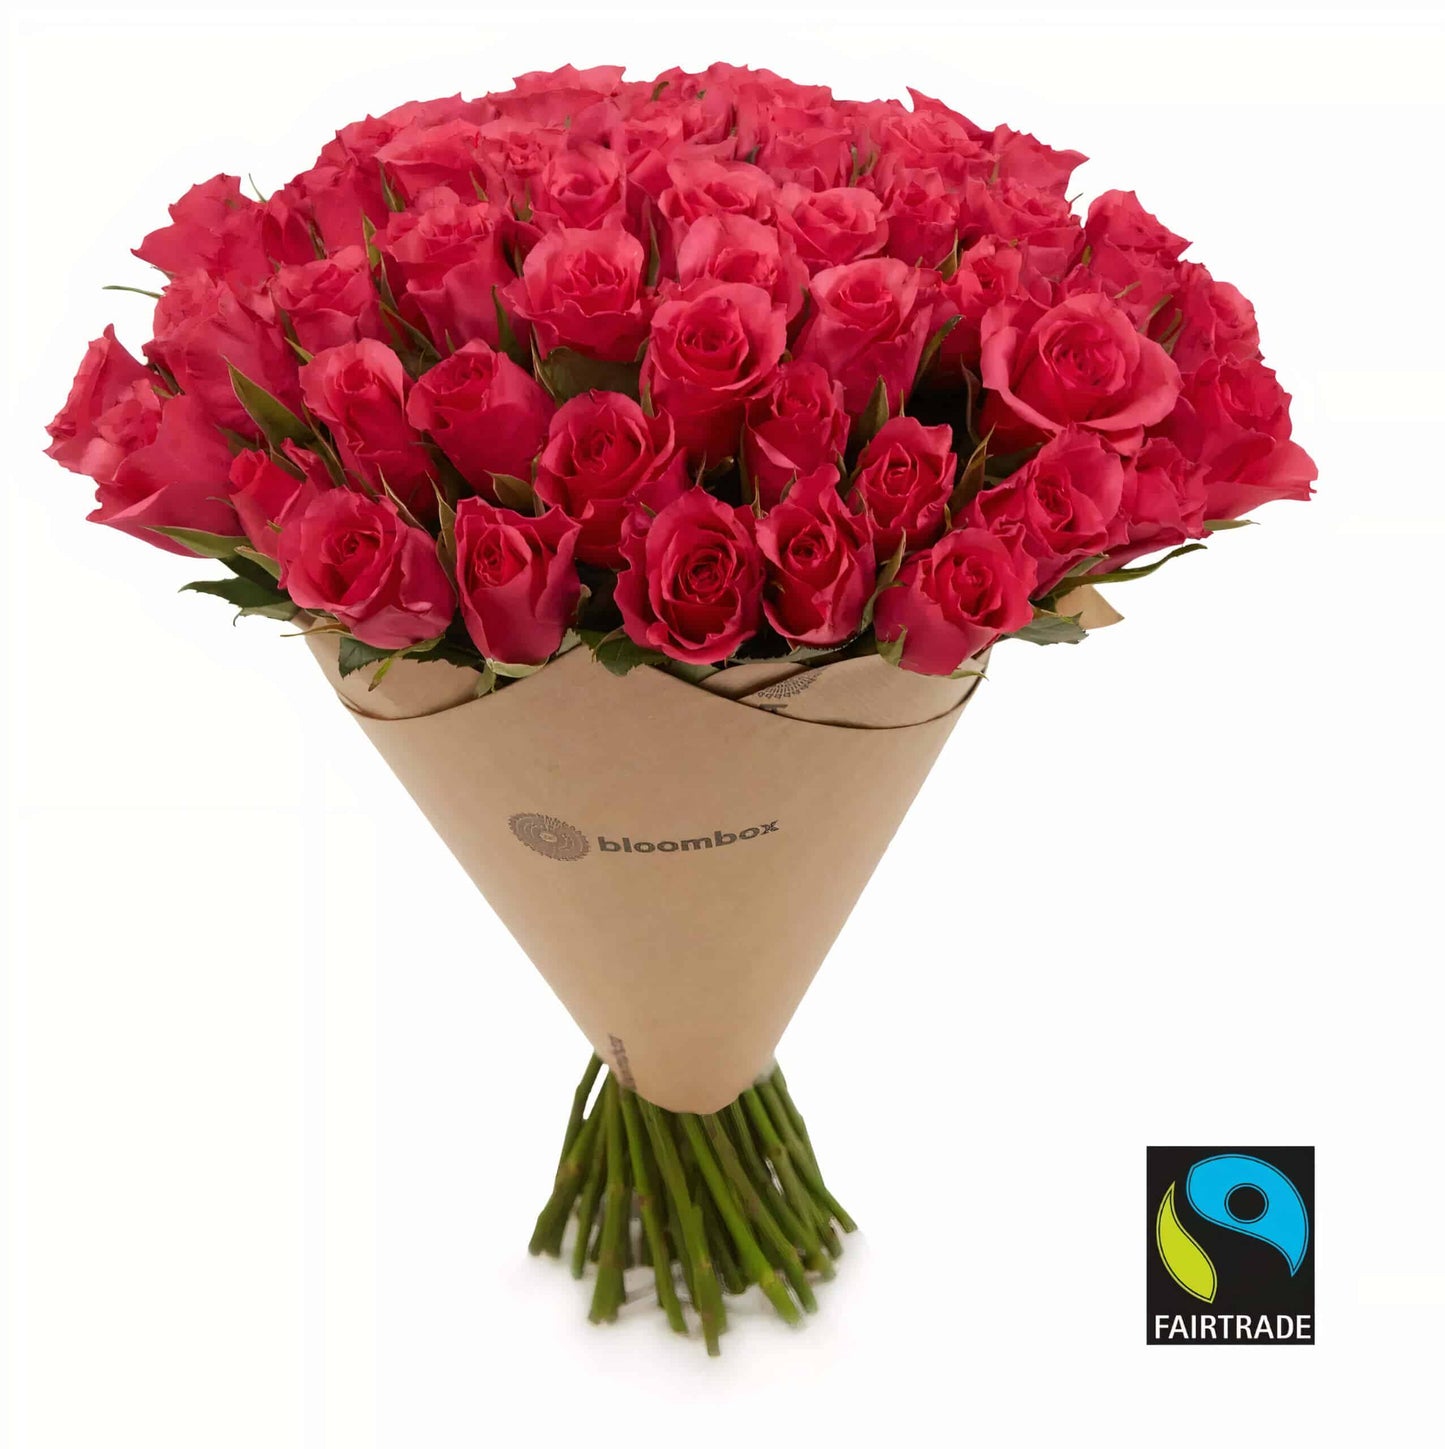 60 Stems Rose Bunches